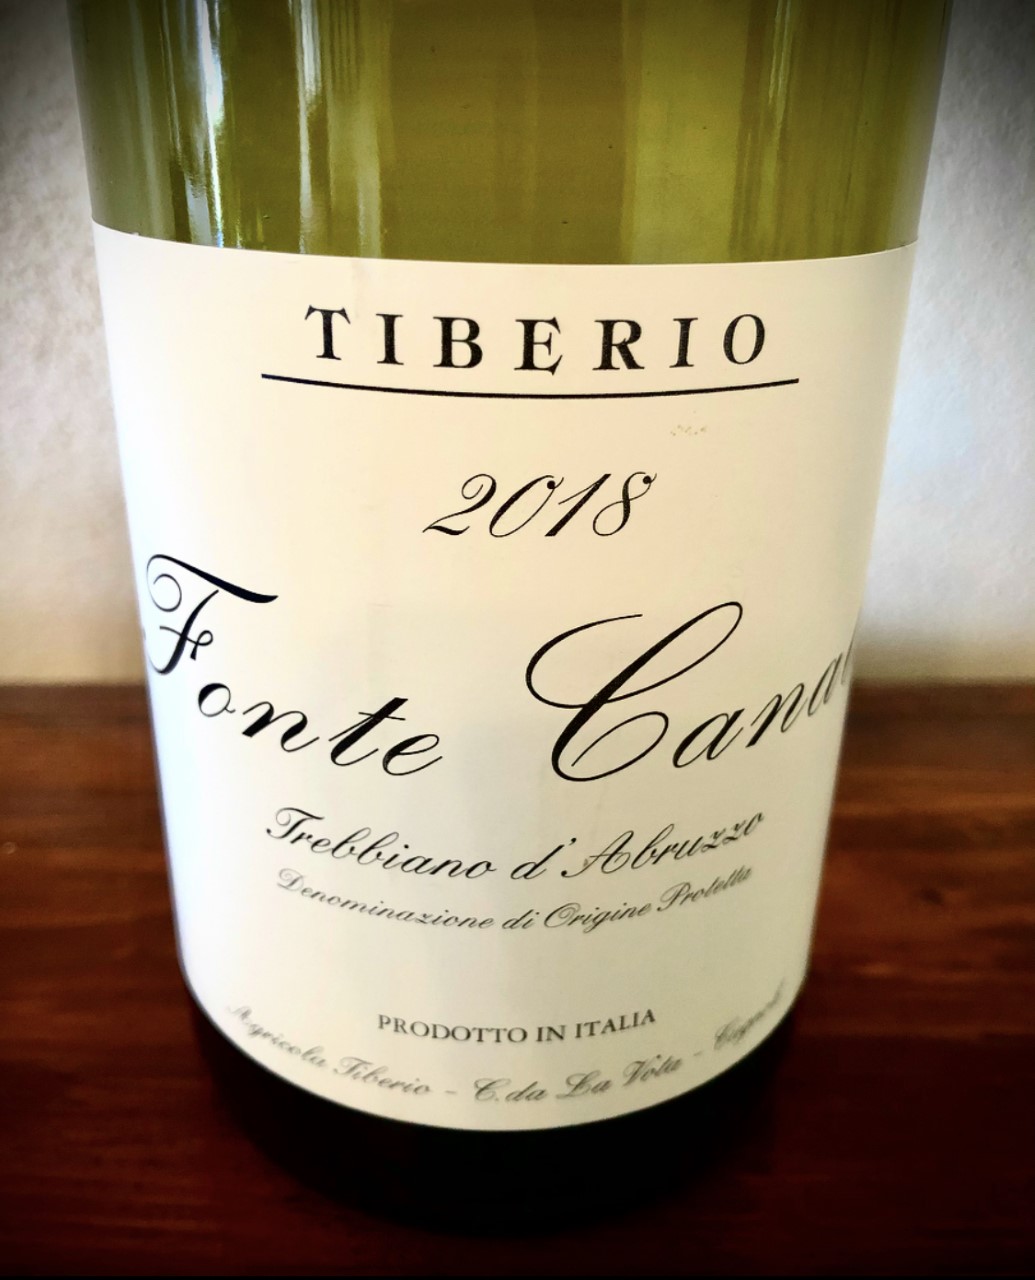 Tiberios-Trebbiano-dAbruzzo-Fonte-Canale-was-one-of-the-four-topscoring-wines-of-the-year-1-1-1-1-1-1-1-1-1-1-1-1